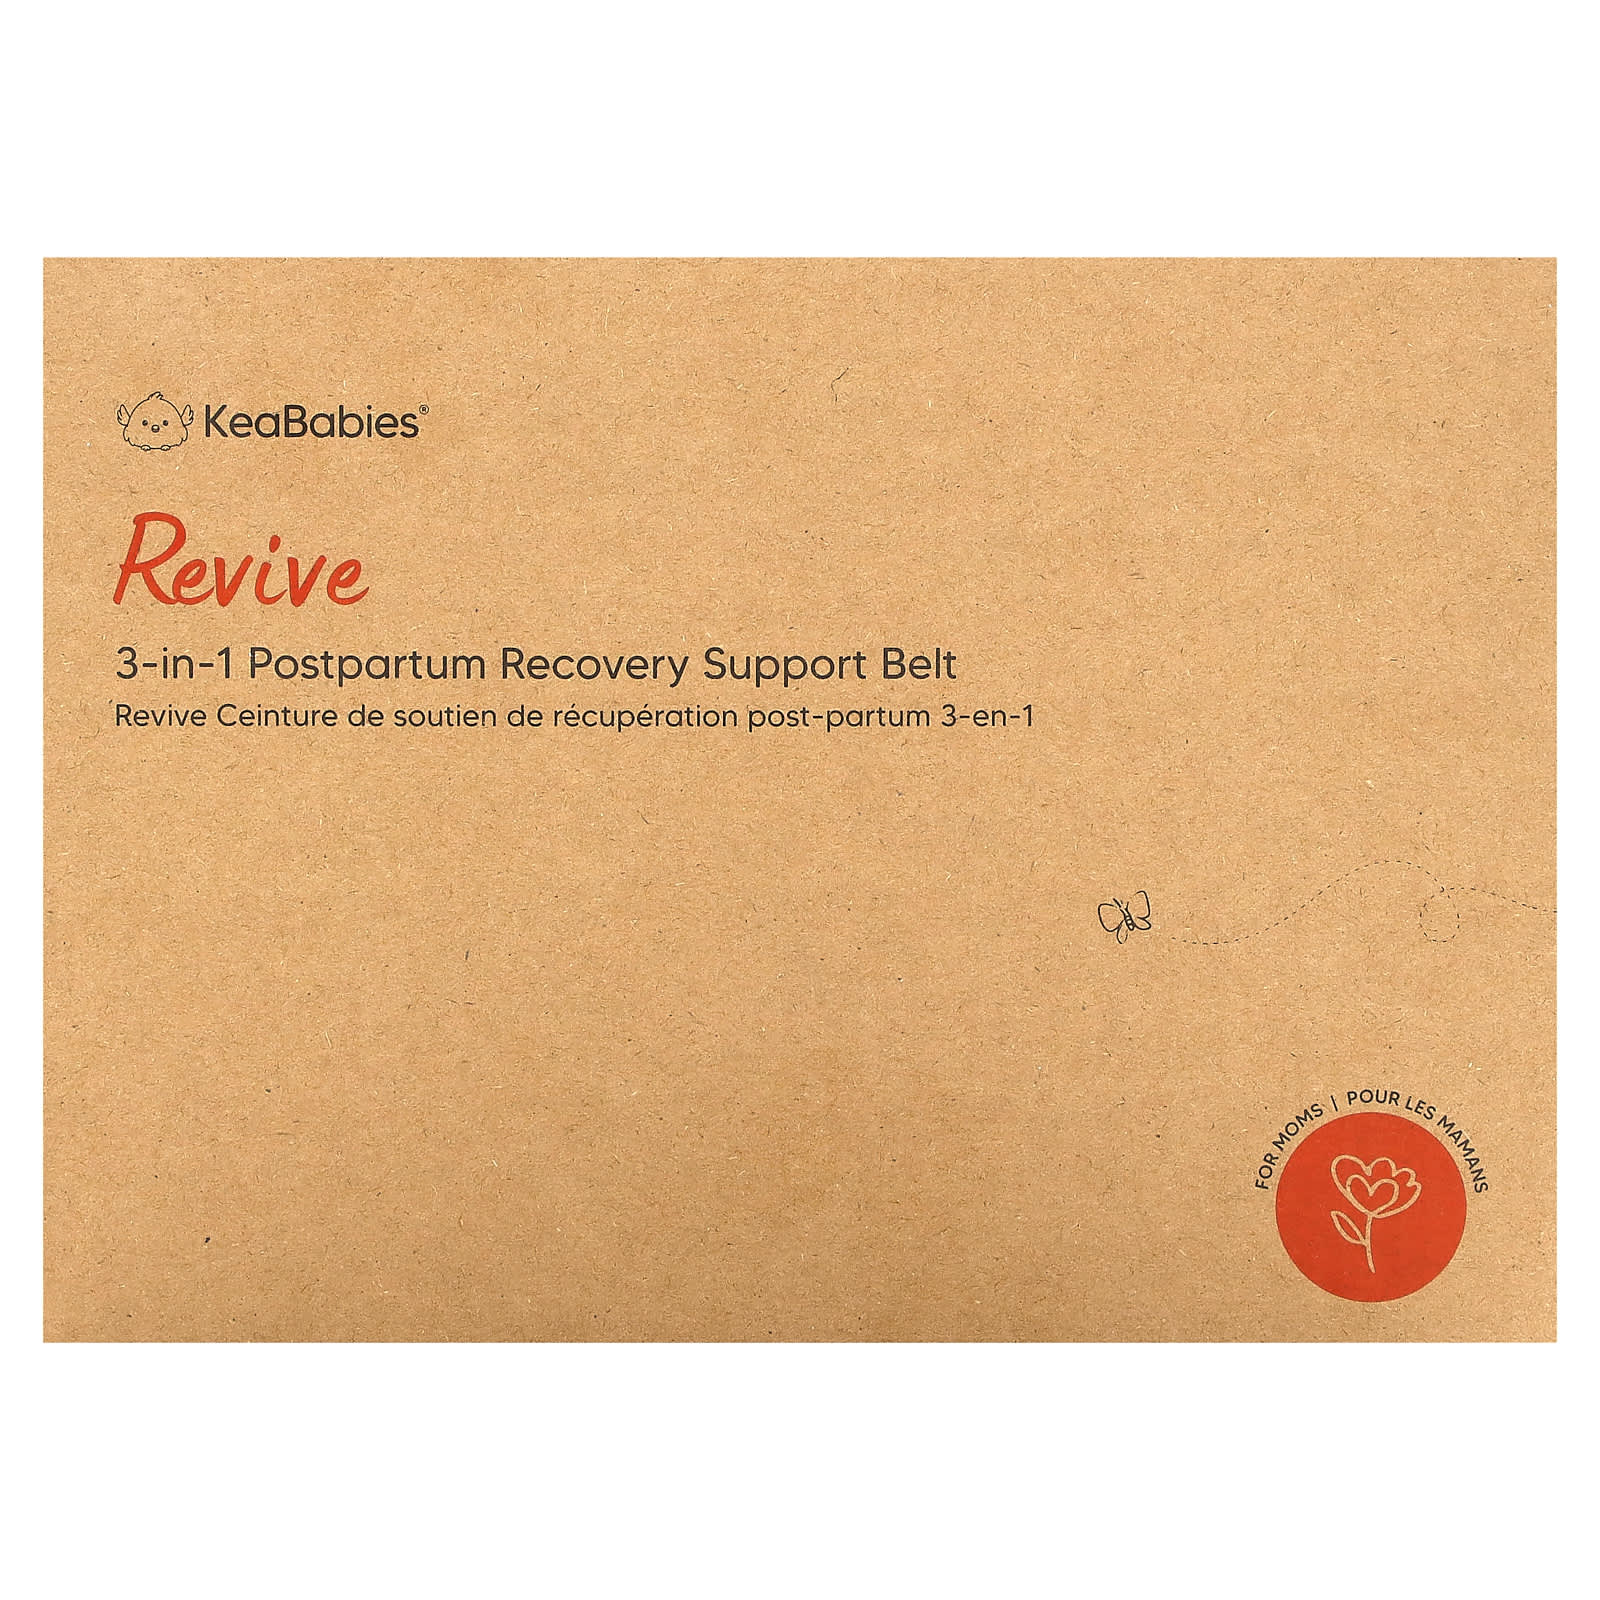 Revive 3-in-1 Postpartum Recovery Support Belt (Matte White)